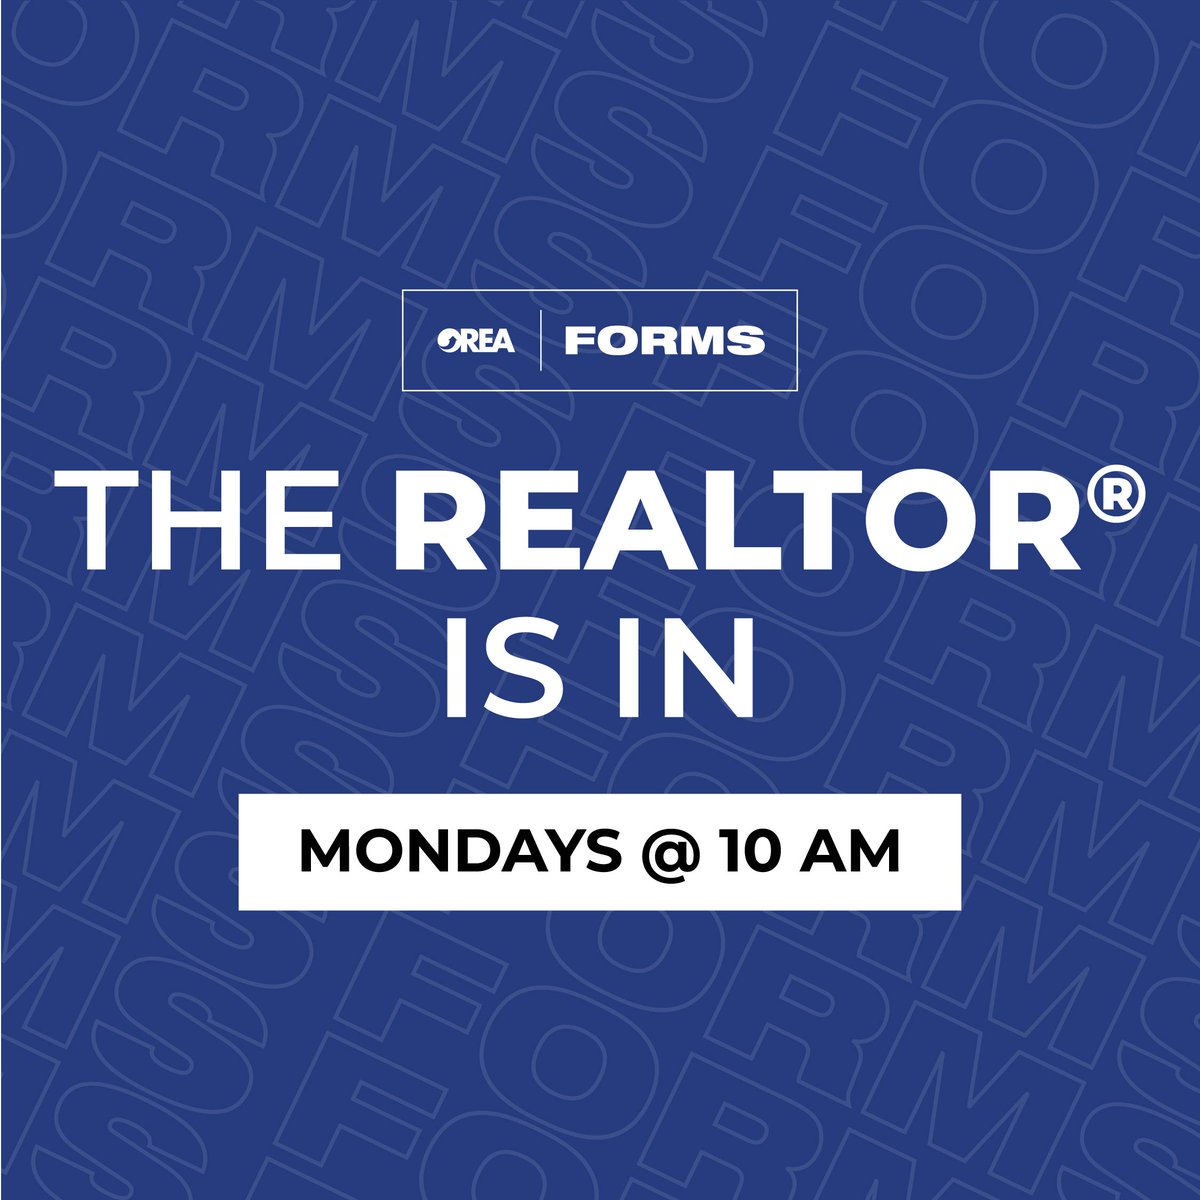 The REALTOR®️ in Residence is back in session, hosted by OREA’s REALTOR®️ In Residence, Ray Ferris, to talk all things Standard Forms and Clauses! Join us for one of our weekly REALTOR®️ Is In 90-minute webinars starting Monday, April 8. To register orea.com/advocacy/TRESA….